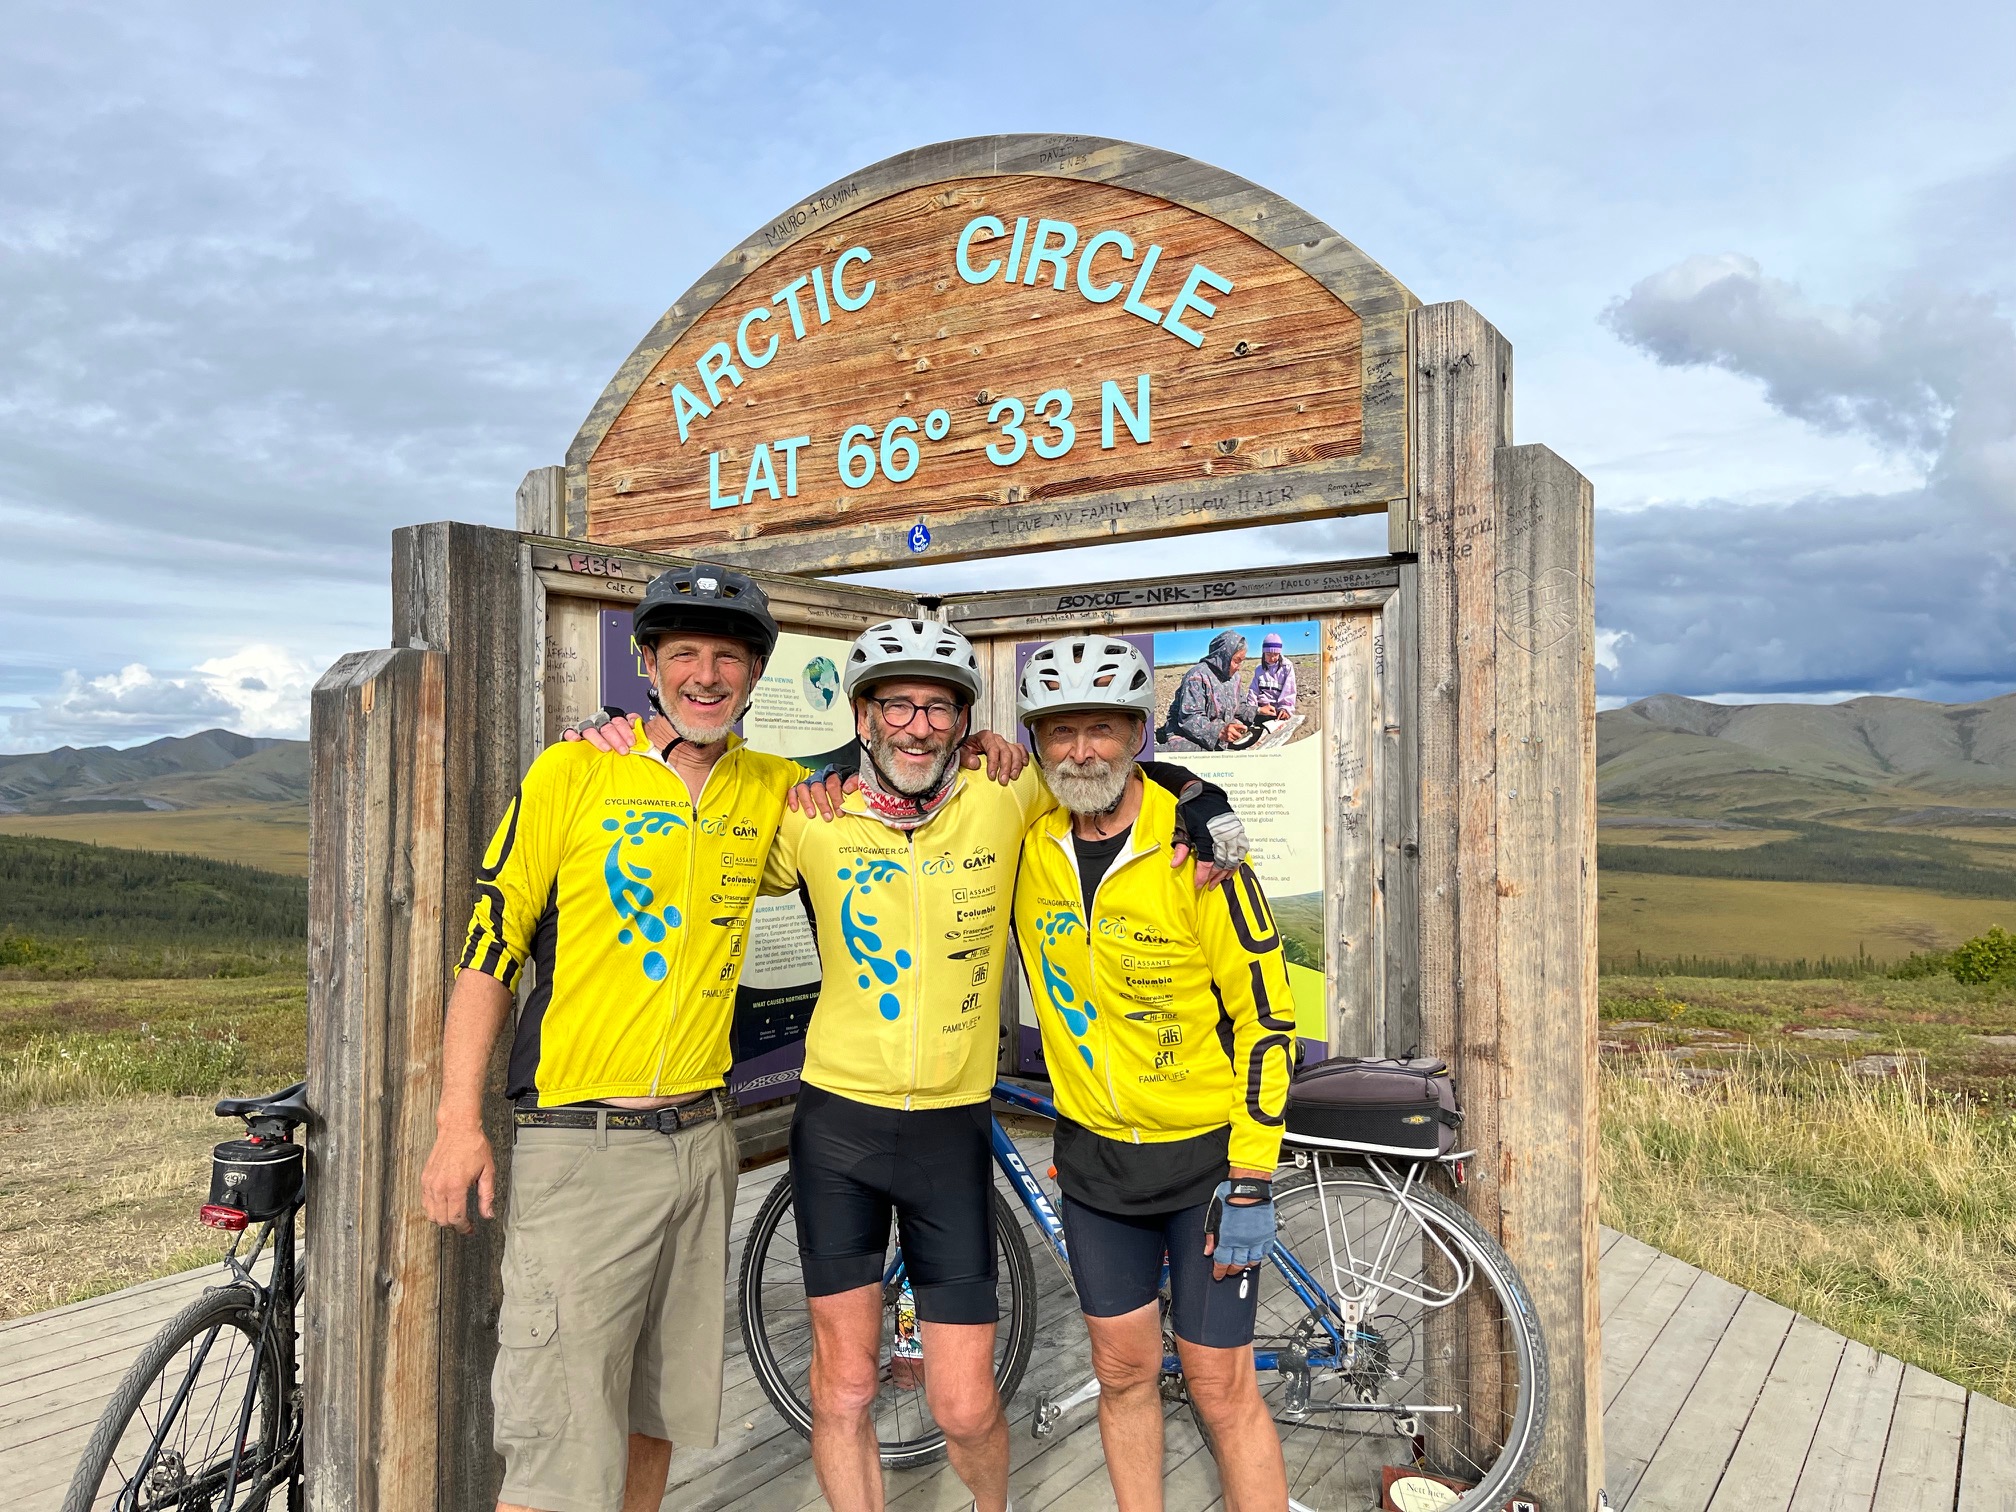 Day 9: Dempster Highway – 152 km